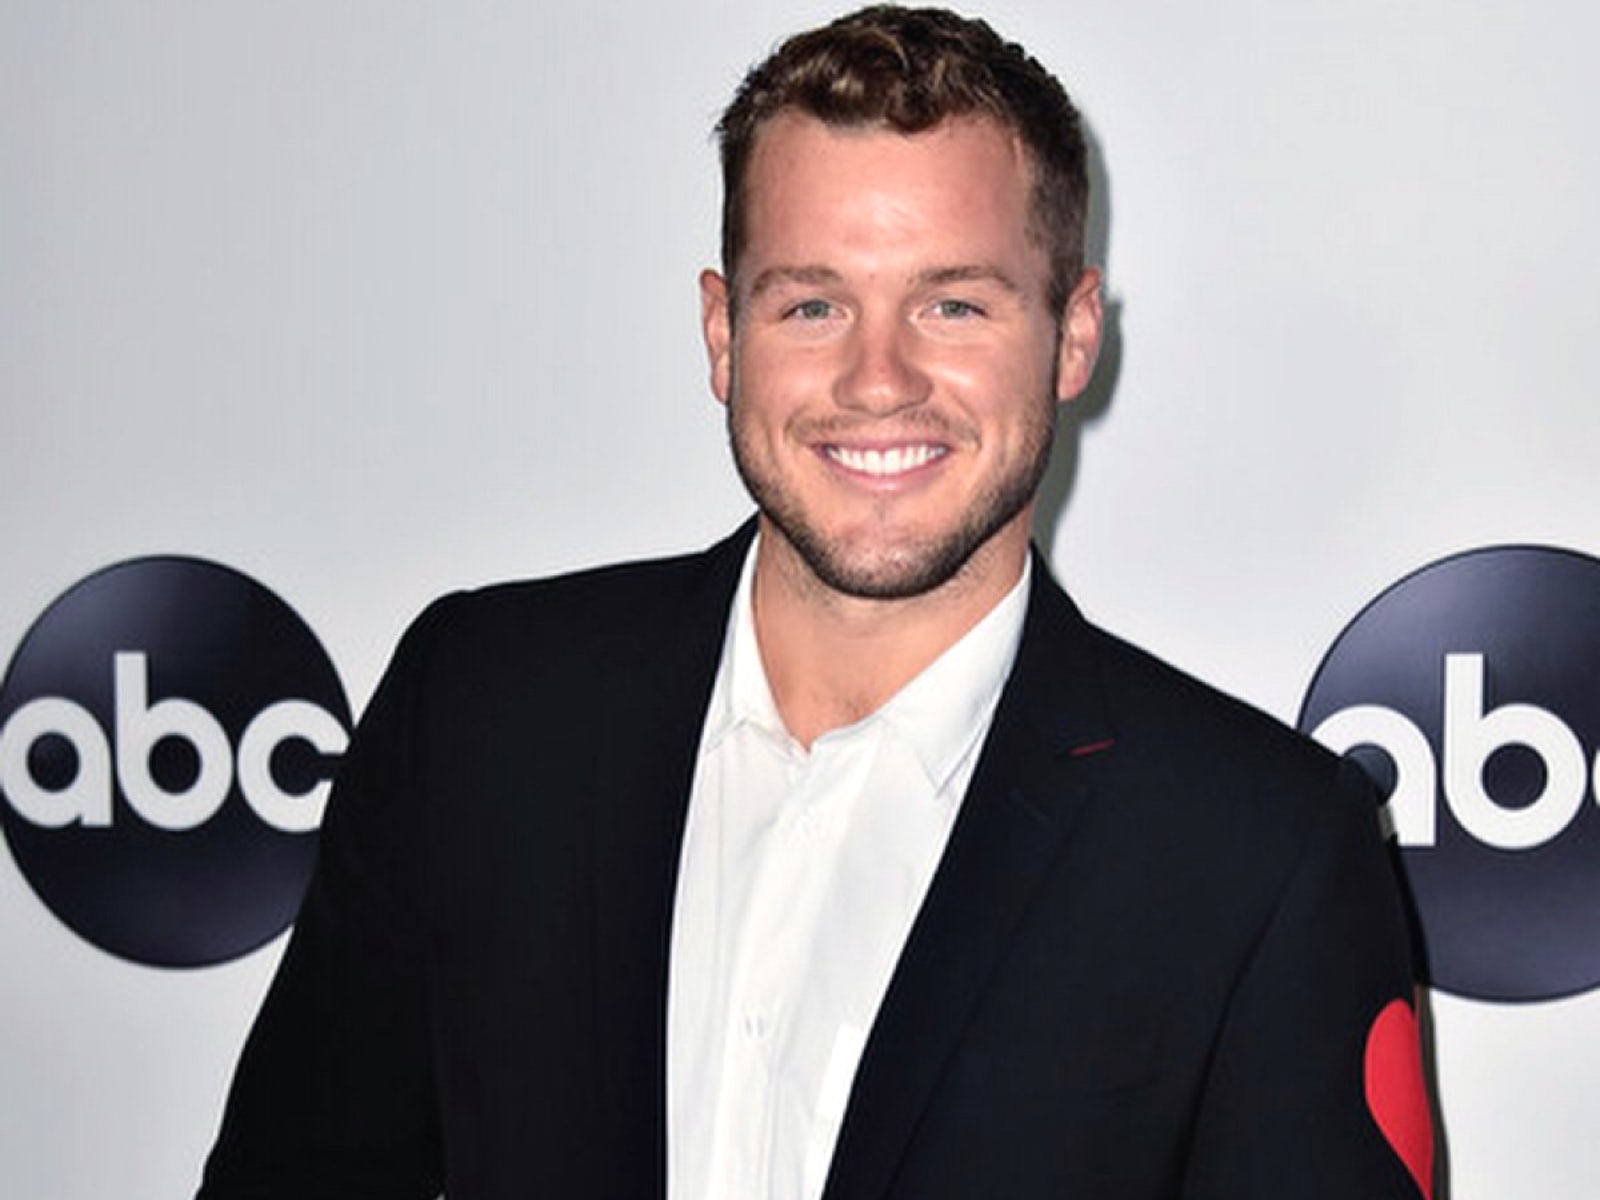 'The Bachelor' spoilers Who did Colton Underwood choose? Is he engaged